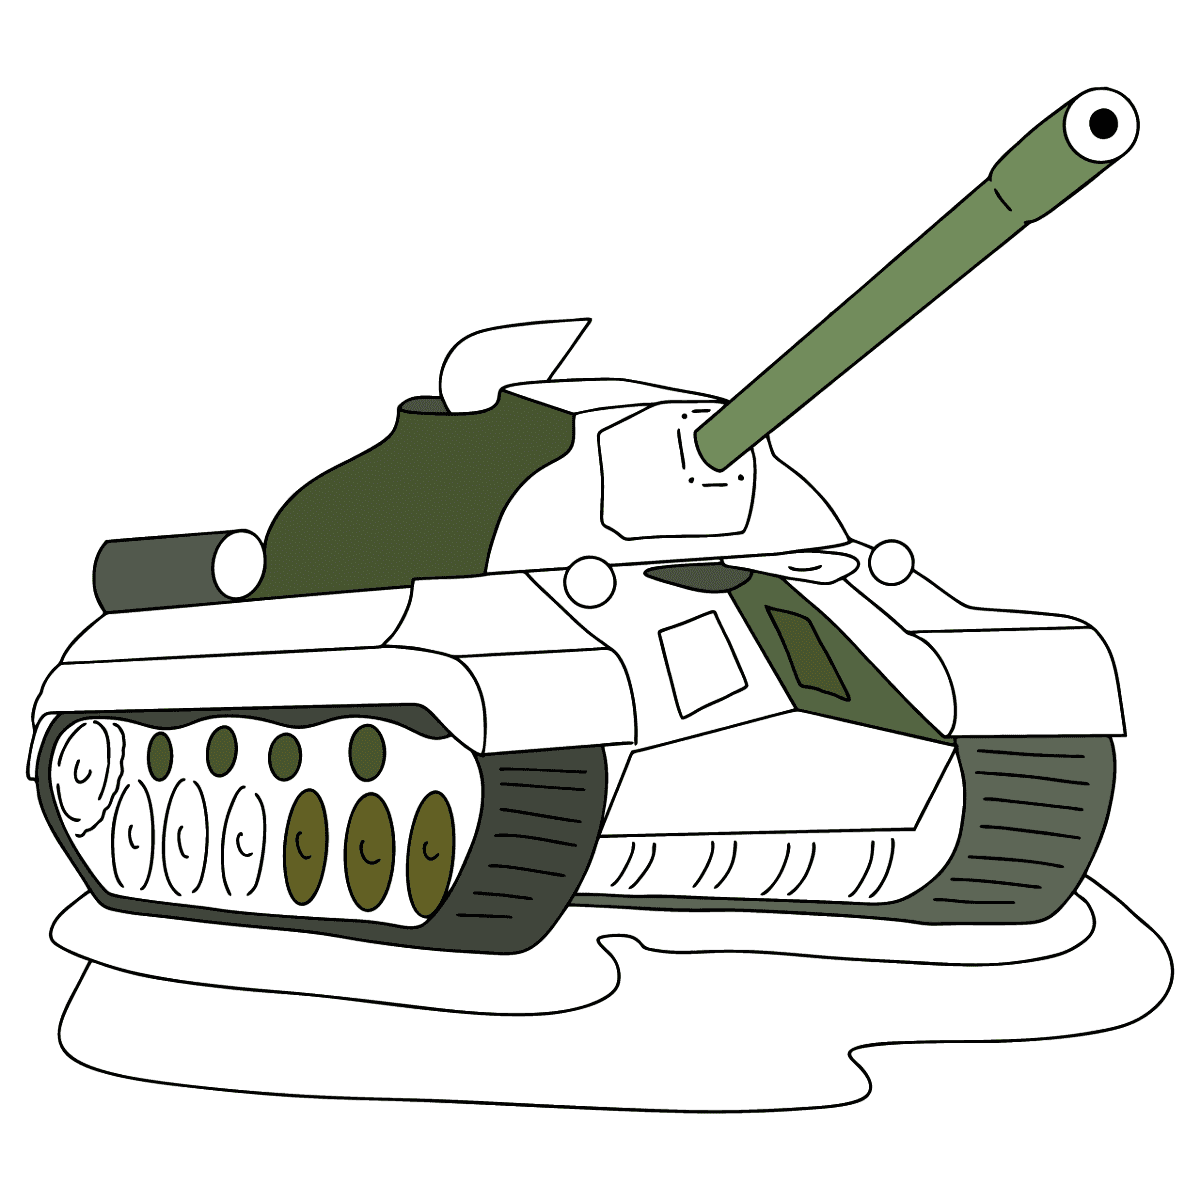 Tank IS 3 coloring page ♥ Print for Free!